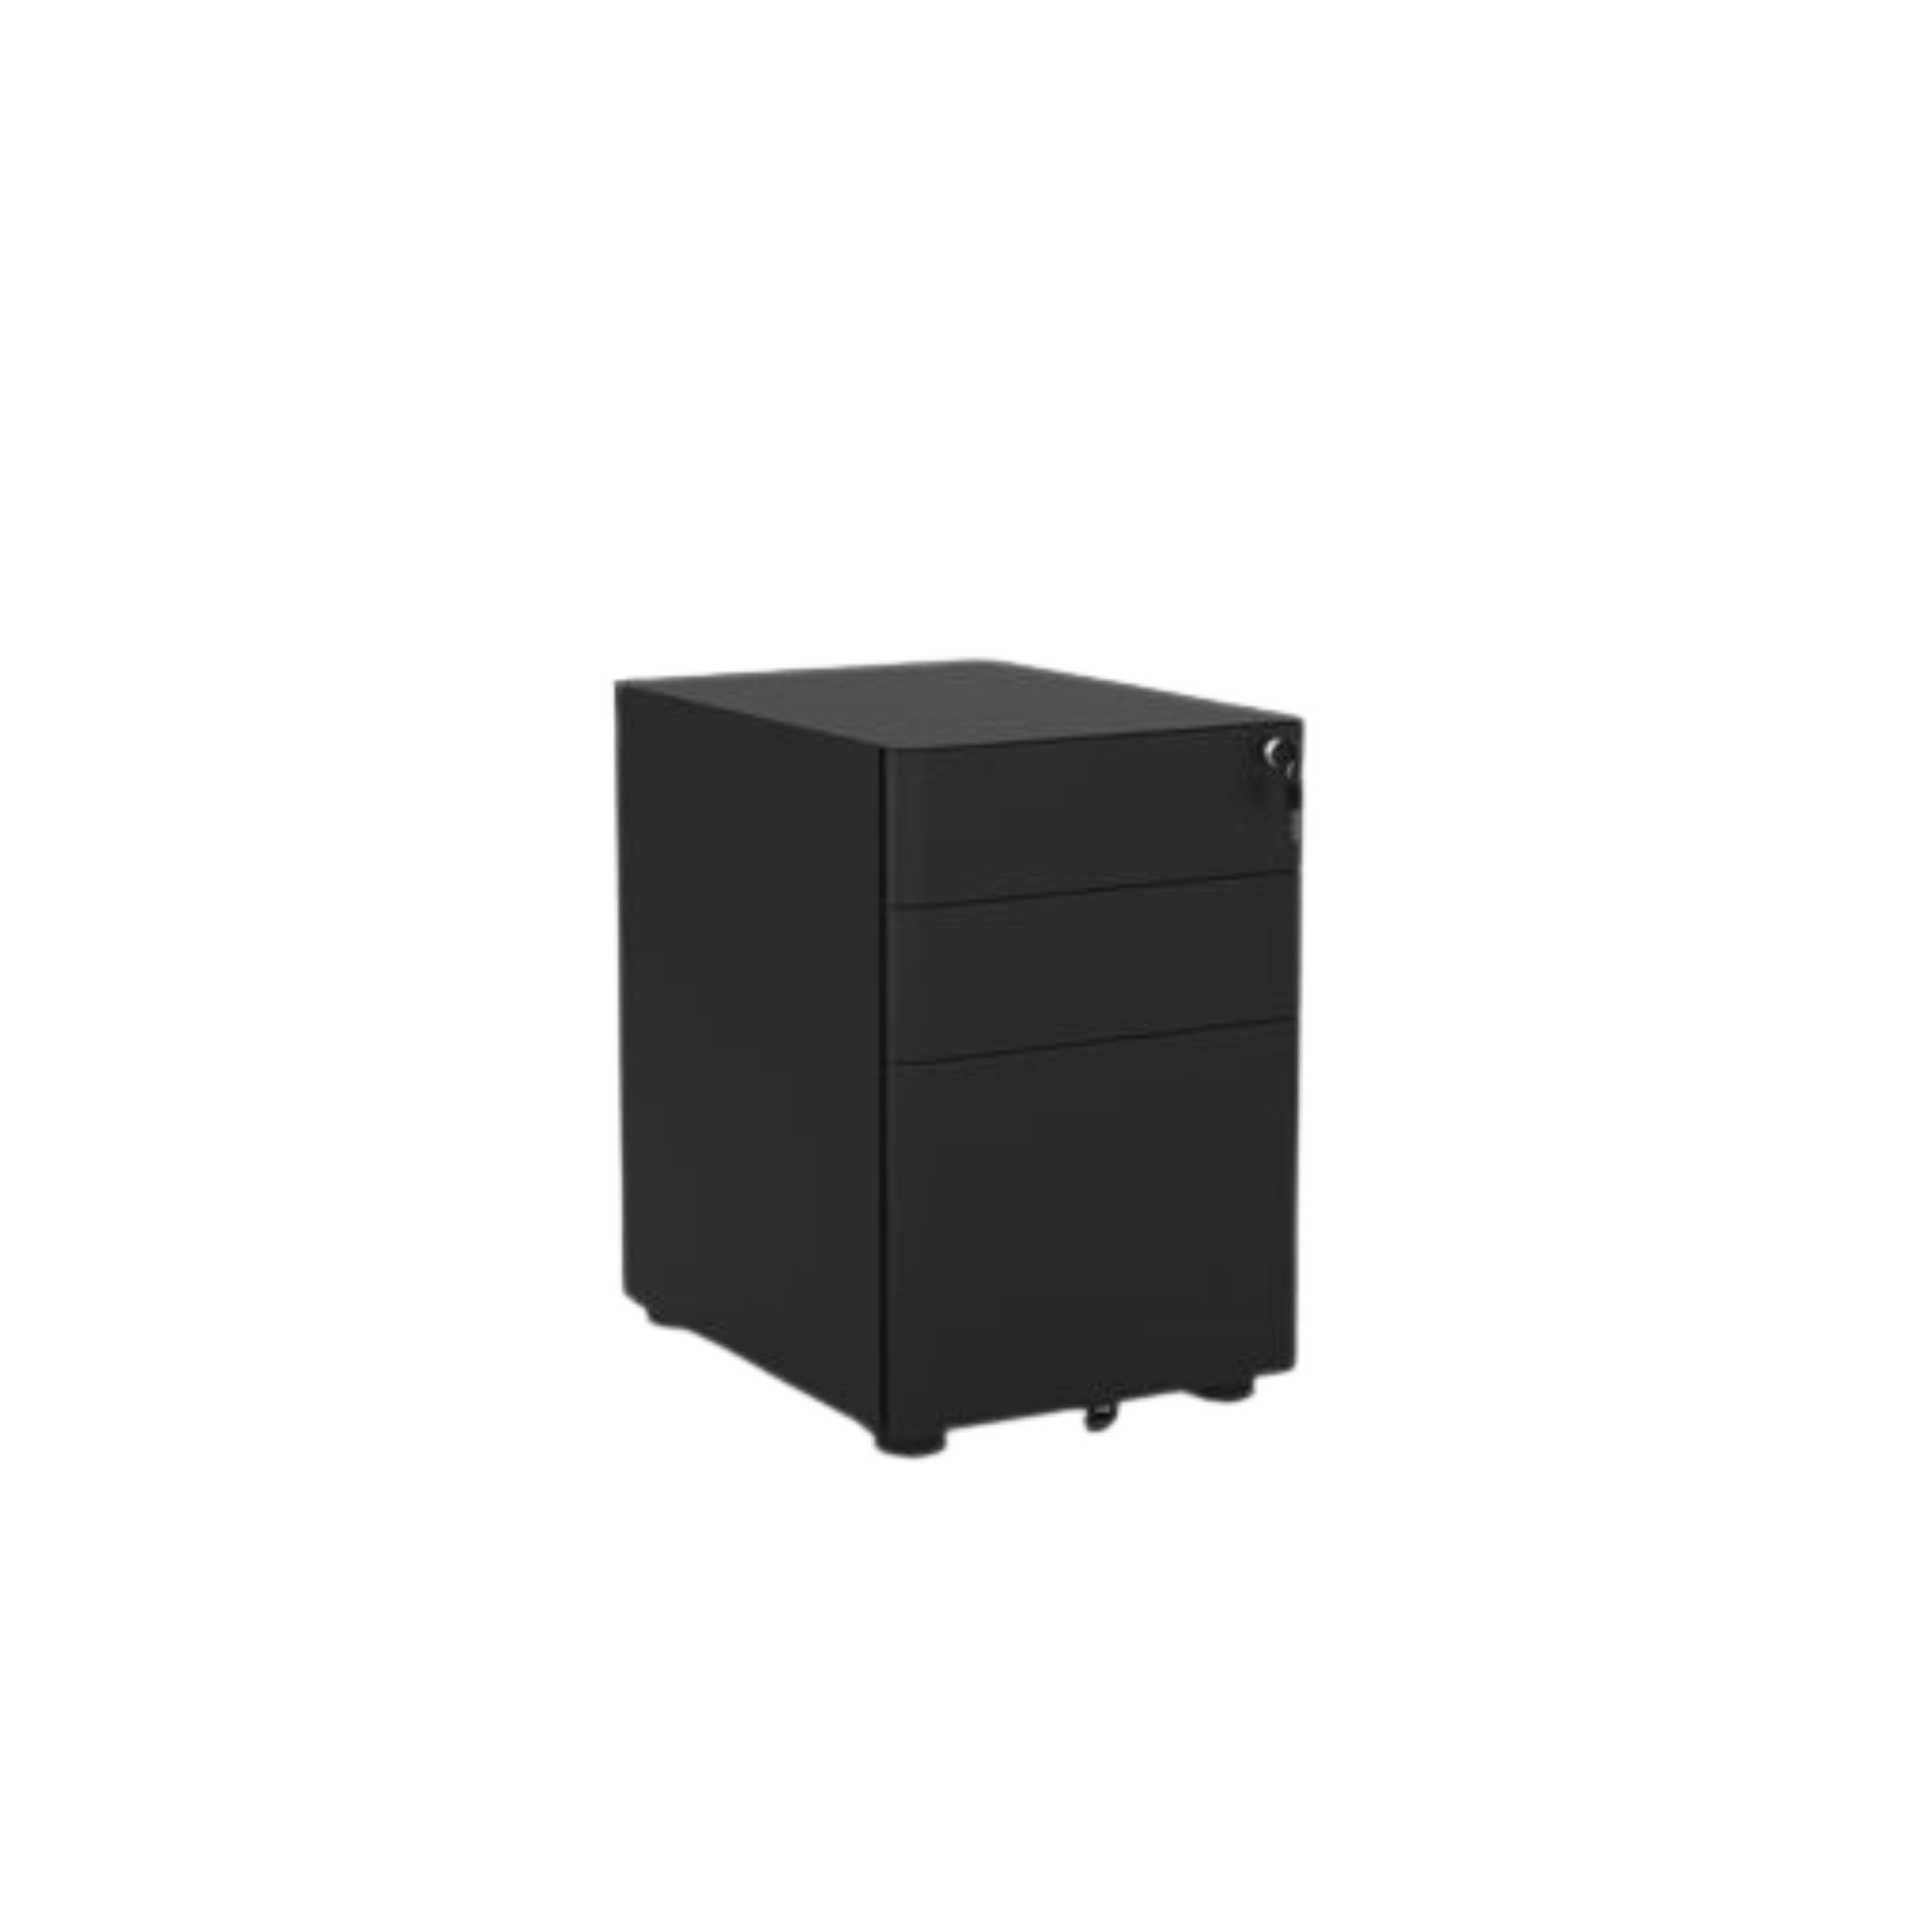 Agile lockable metal mobile with 2 stationery drawers and 1 filing drawer in black